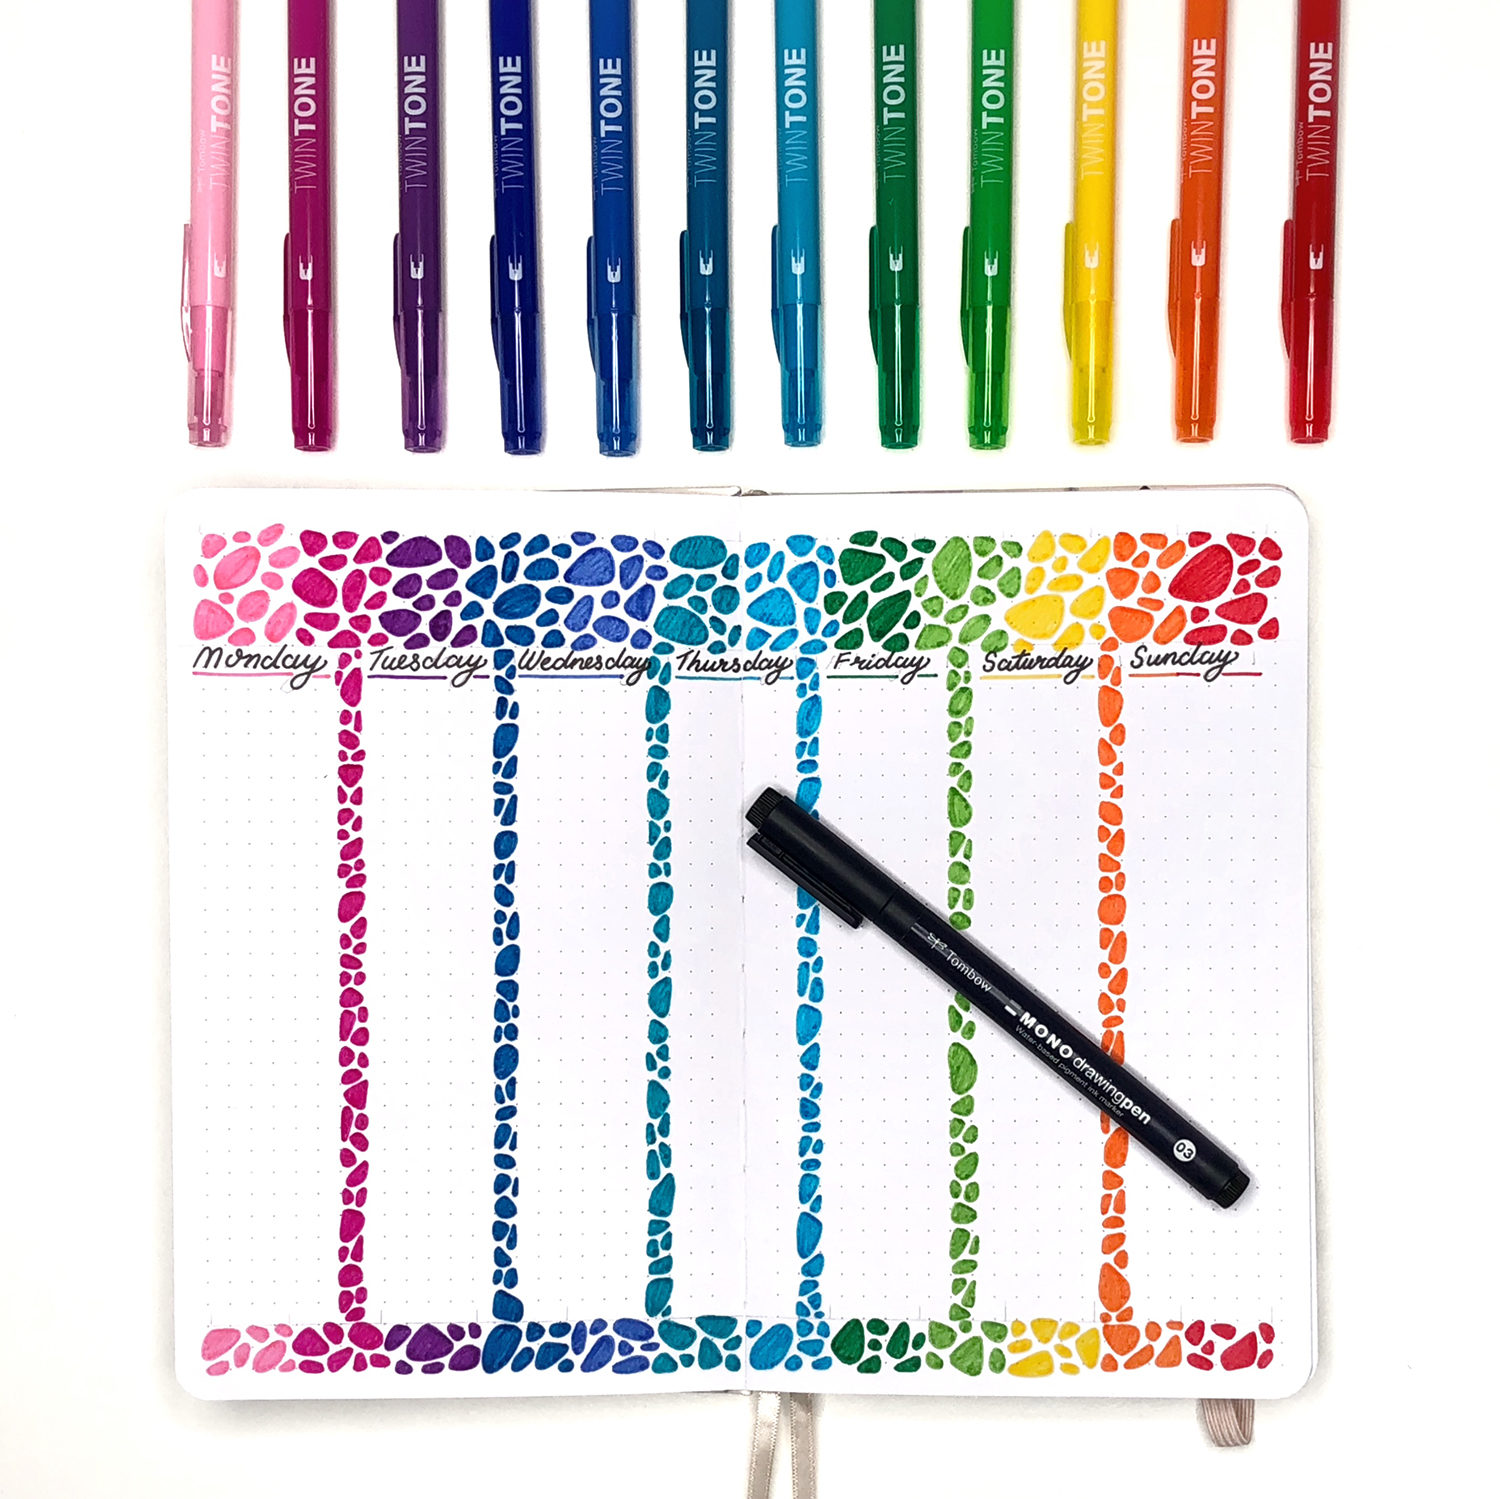 Rainbow Pebbles Planner Page by Jessica Mack on behalf of Tombow